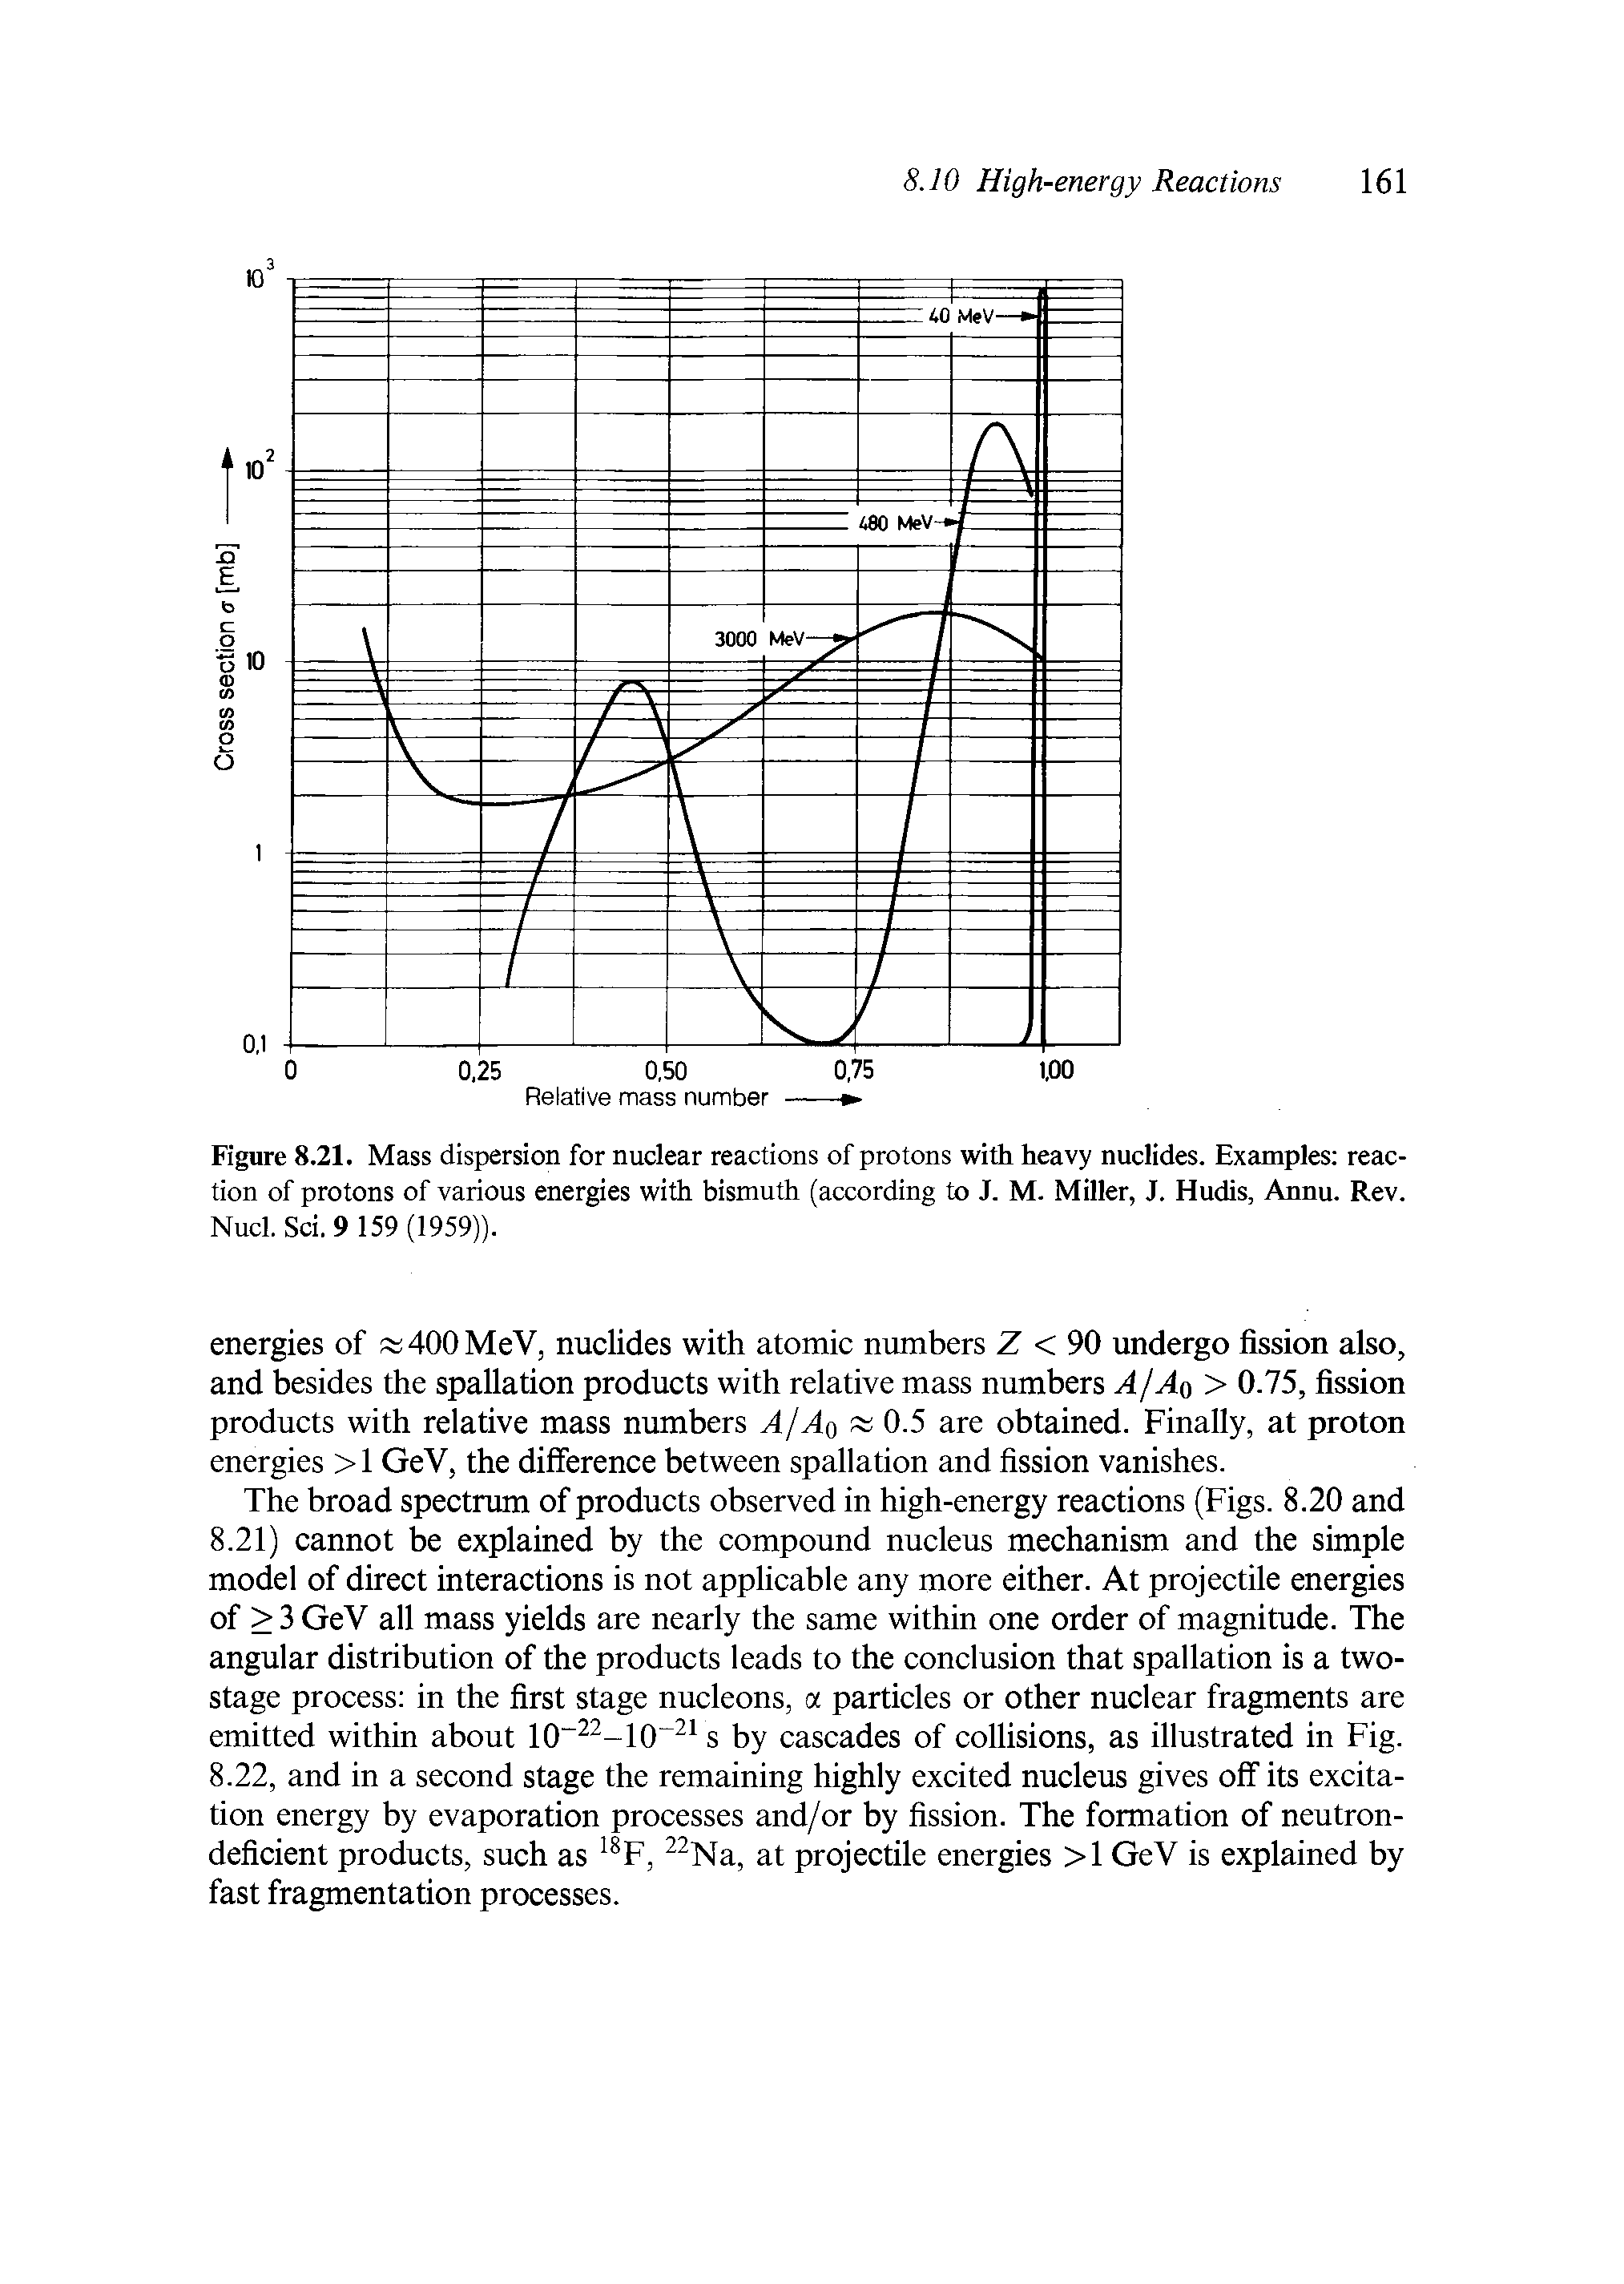 Figure 8.21. Mass dispersion for nuclear reactions of protons with heavy nuclides. Examples reaction of protons of various energies with bismuth (according to J. M. Miller, J. Hudis, Annu. Rev. Nucl. Sci. 9 159 (1959)).